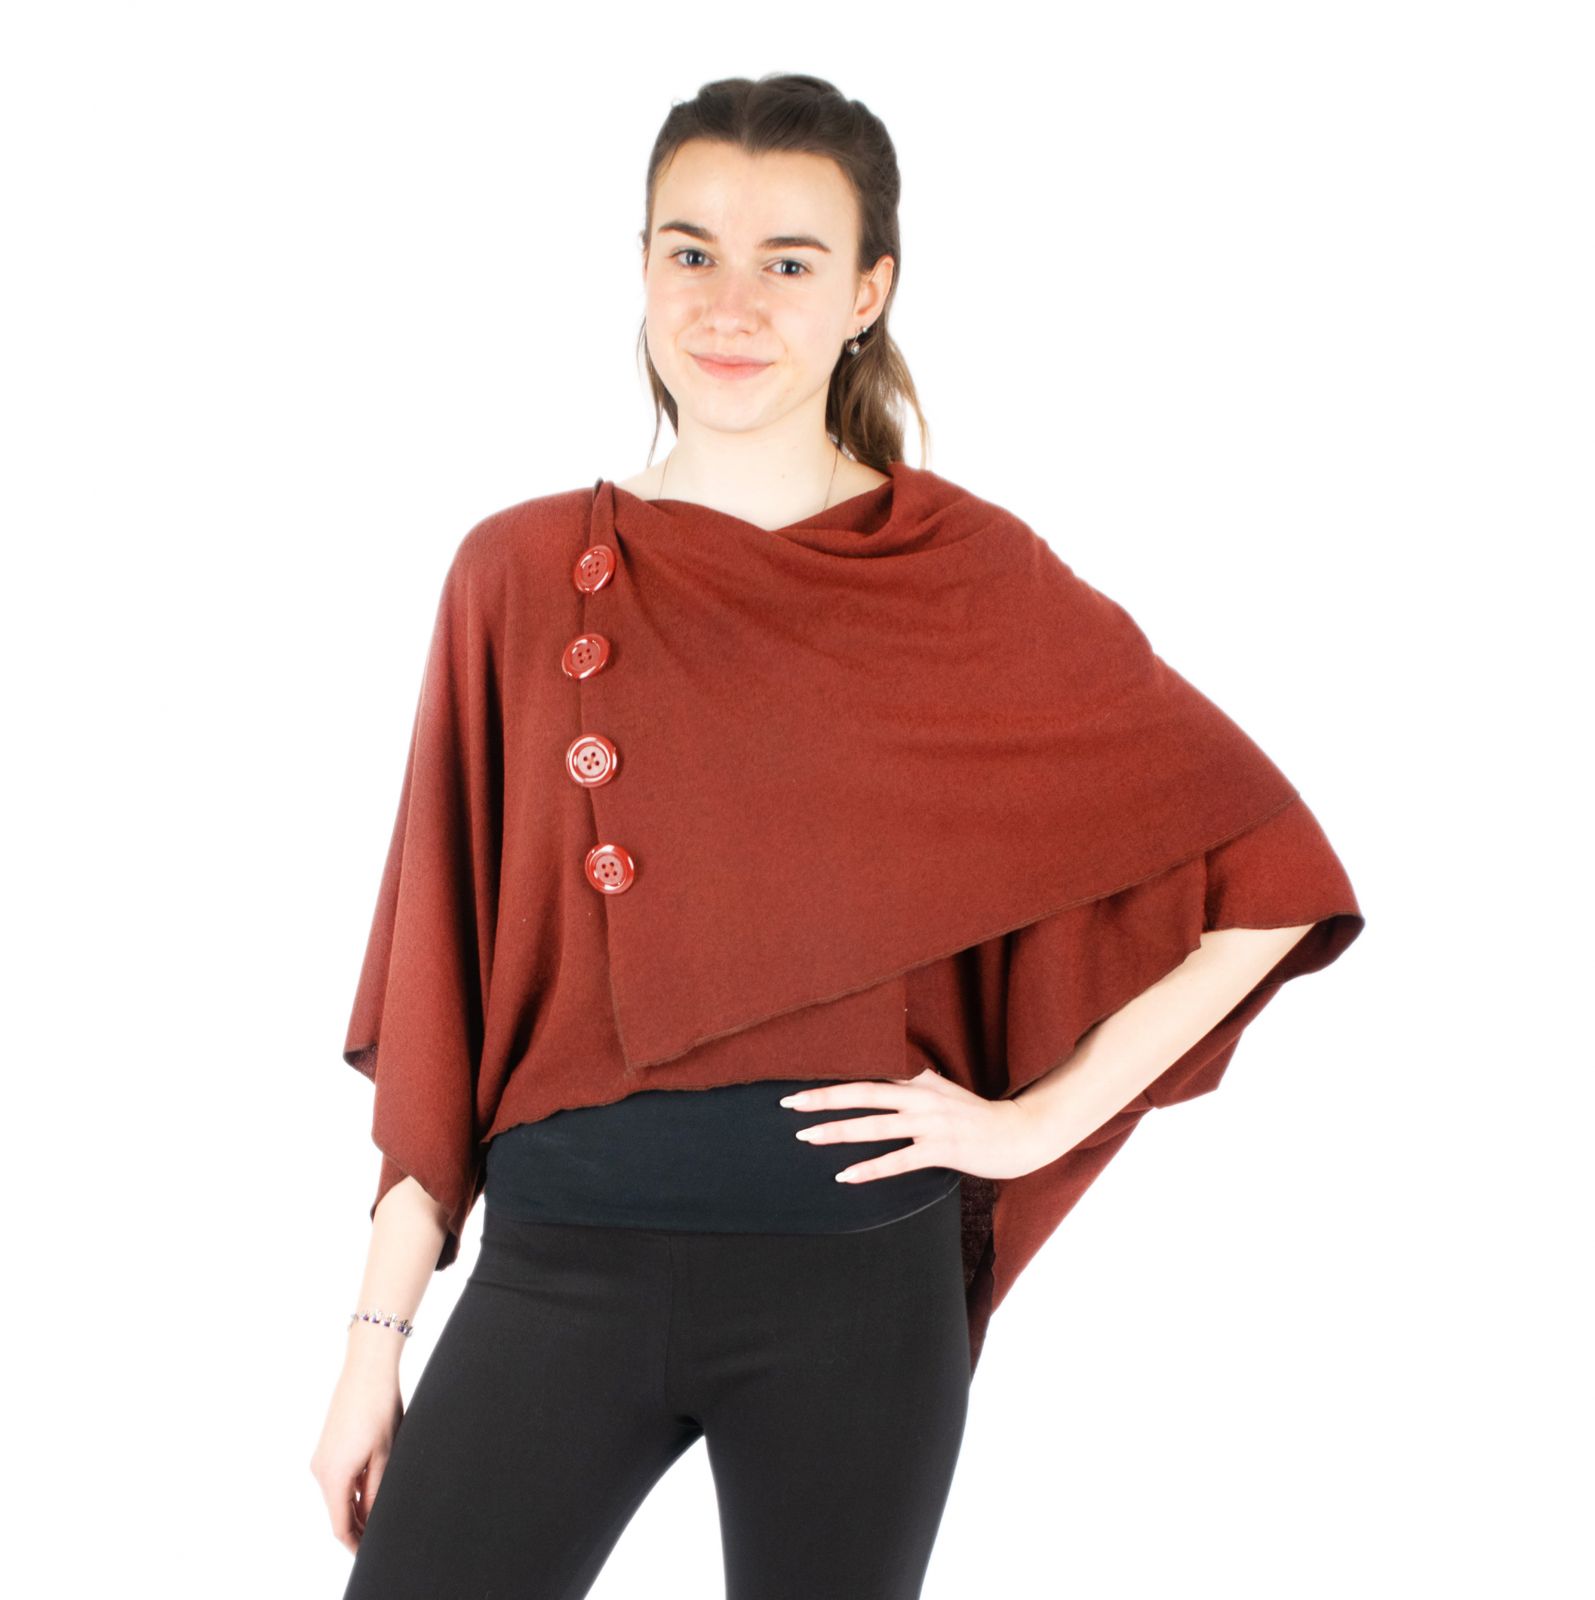 Women's poncho / pelerine with buttons Kanya Brick Red Thailand